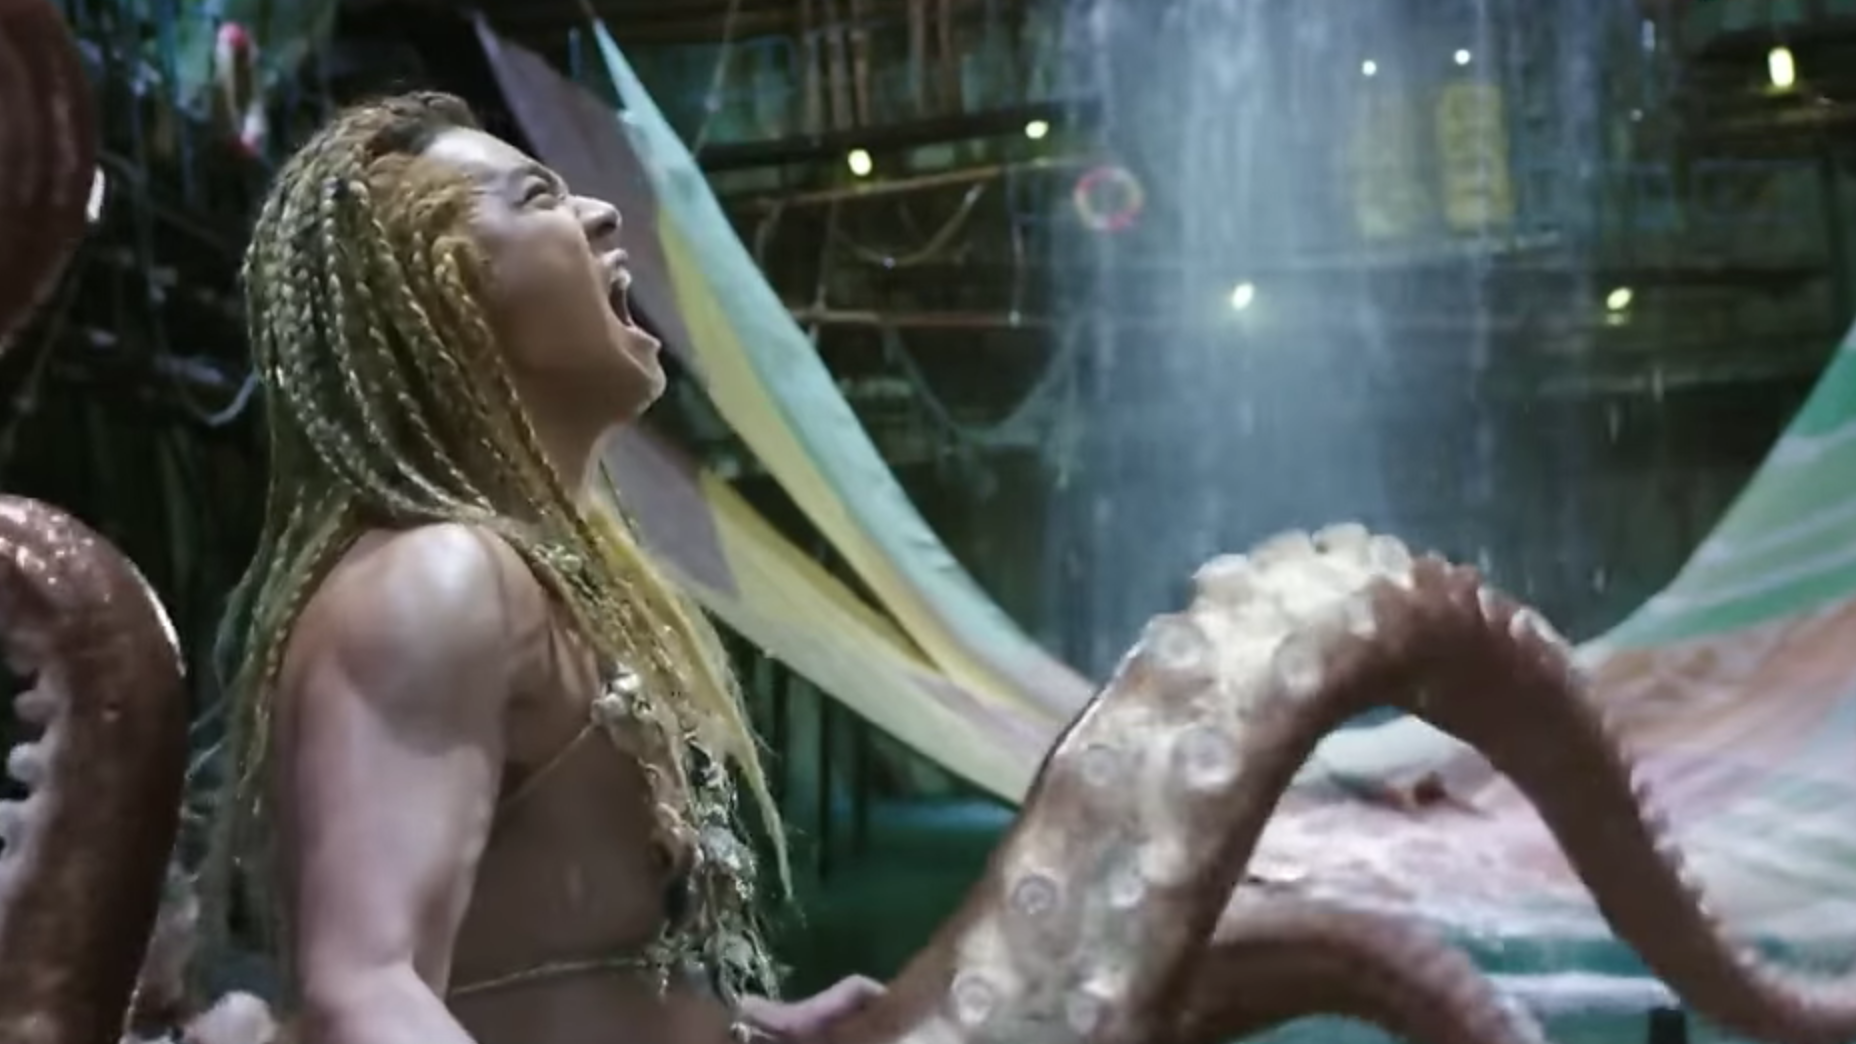 How This Wildly Bizzare Chinese Mermaid Movie Broke Box Office Records